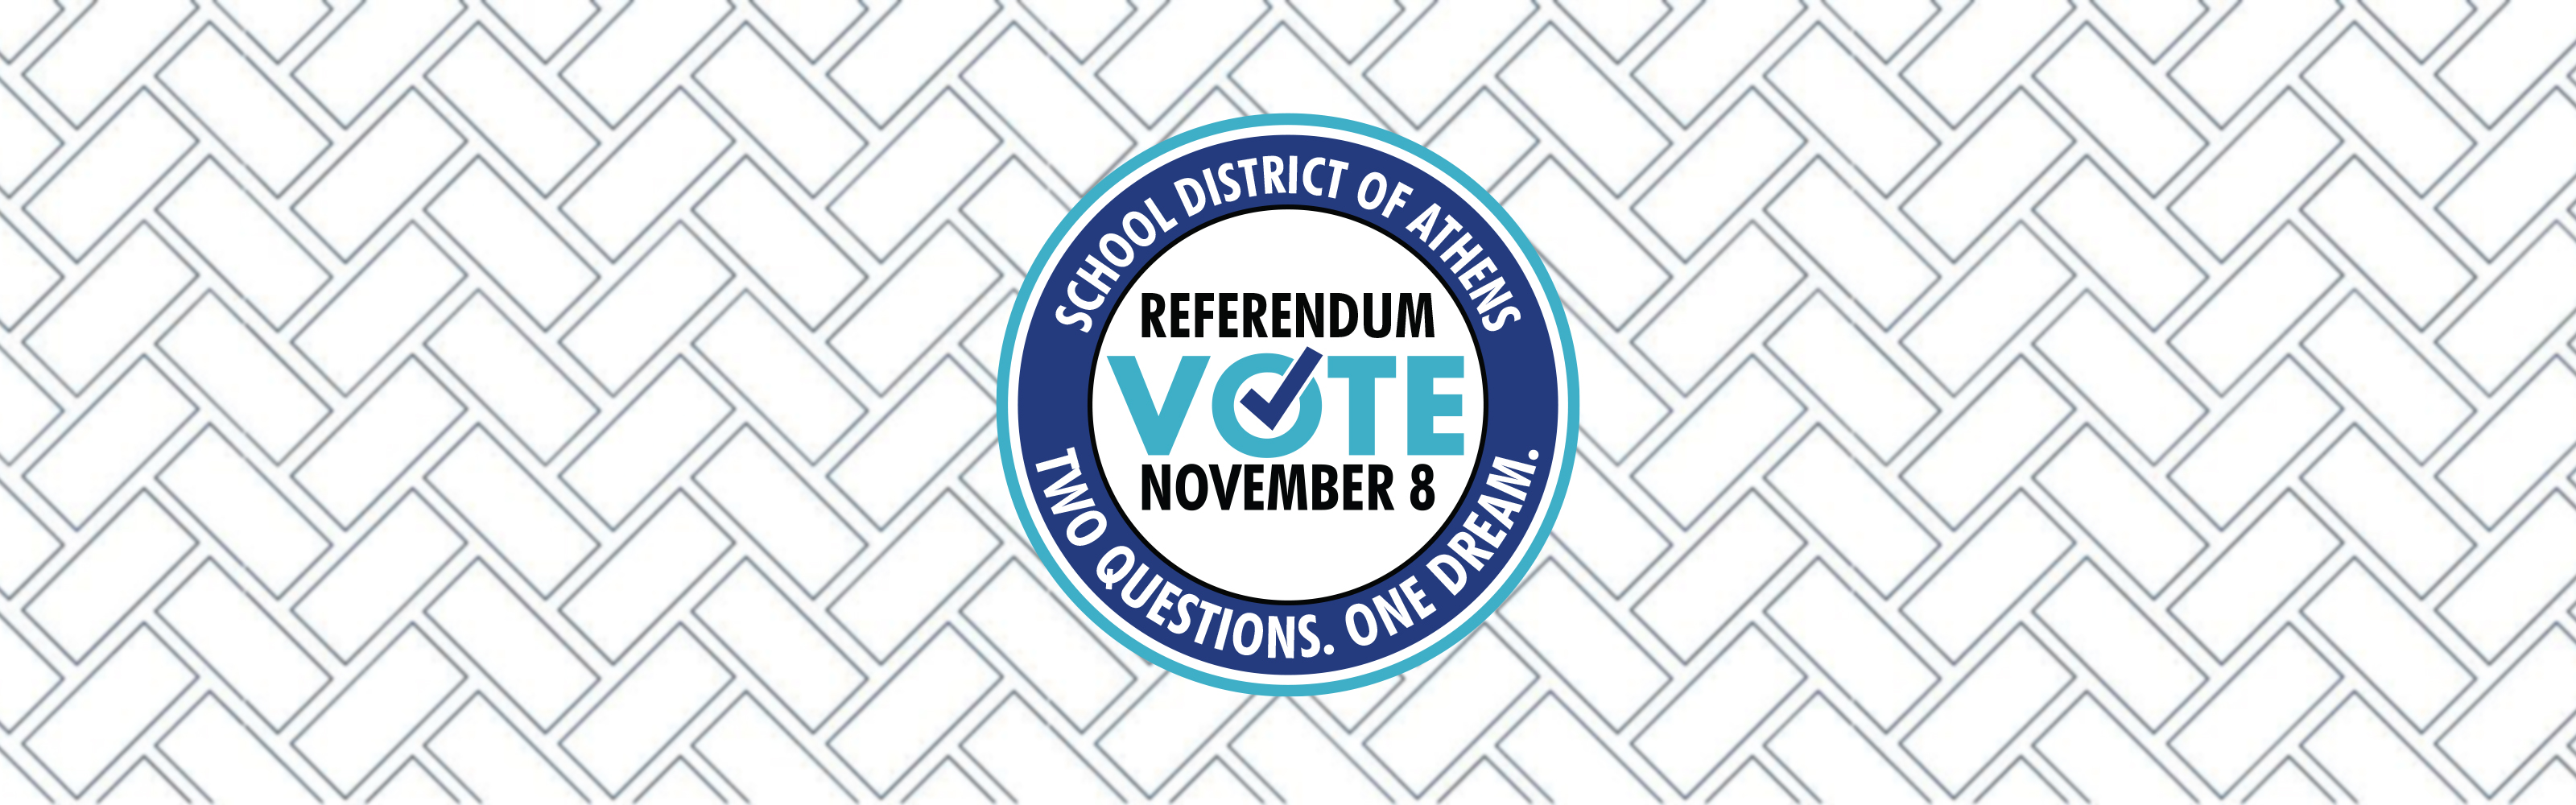 School District of Athens - Referendum Vote - November 8 - two questions. one dream. 